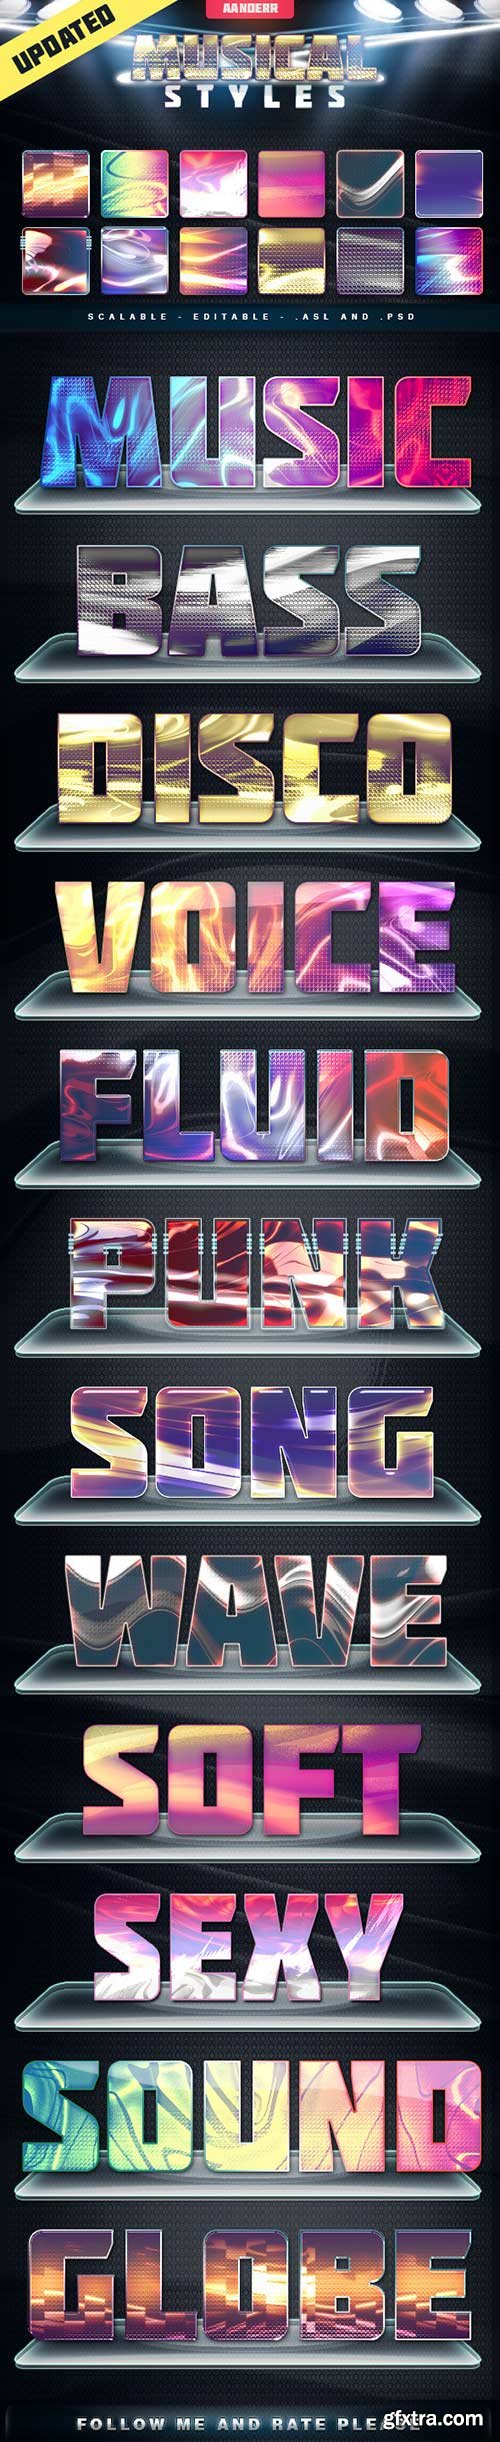 GraphicRiver - Musical Styles 2901881